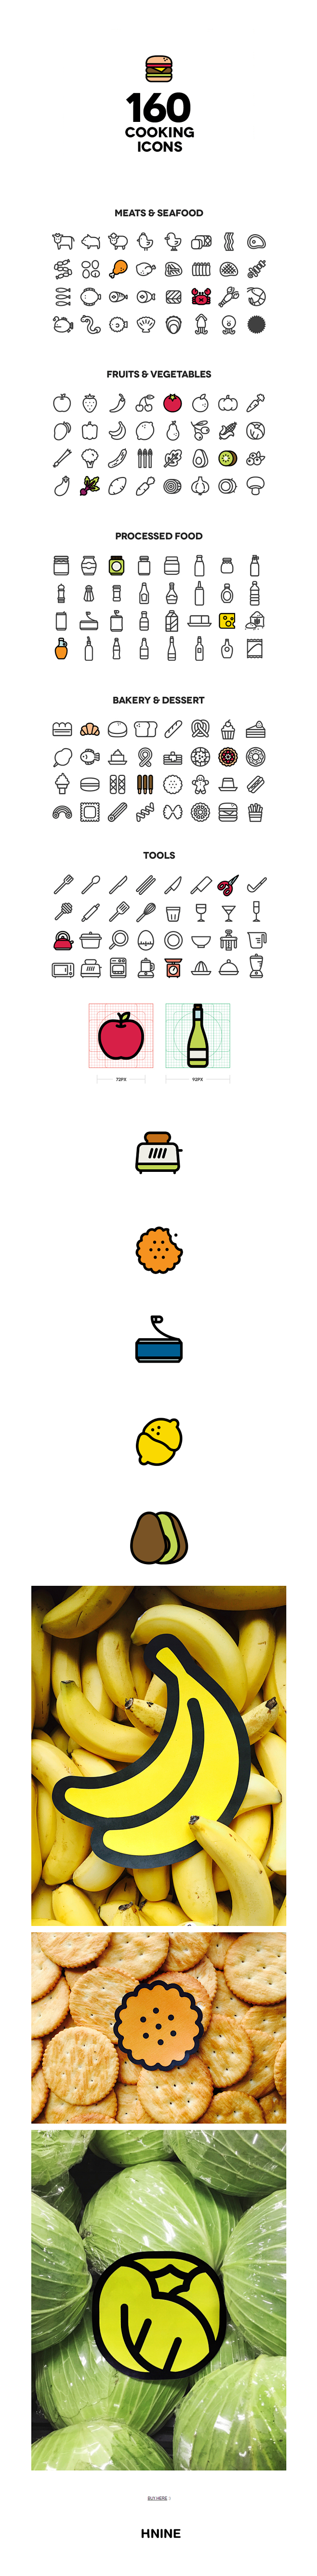 160 Cooking Icons on...